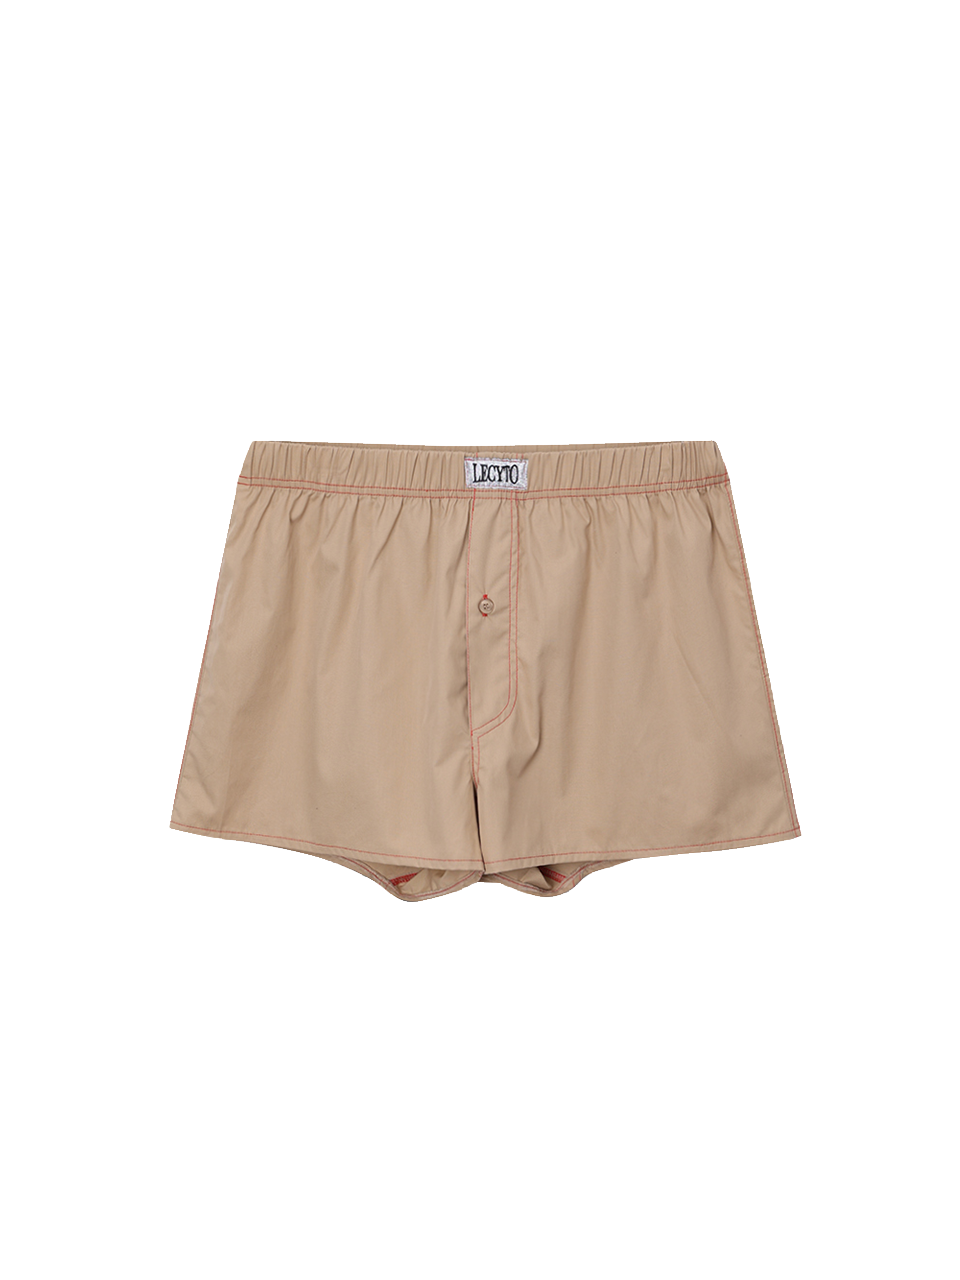 Layered Trunk Pants_[Beige]